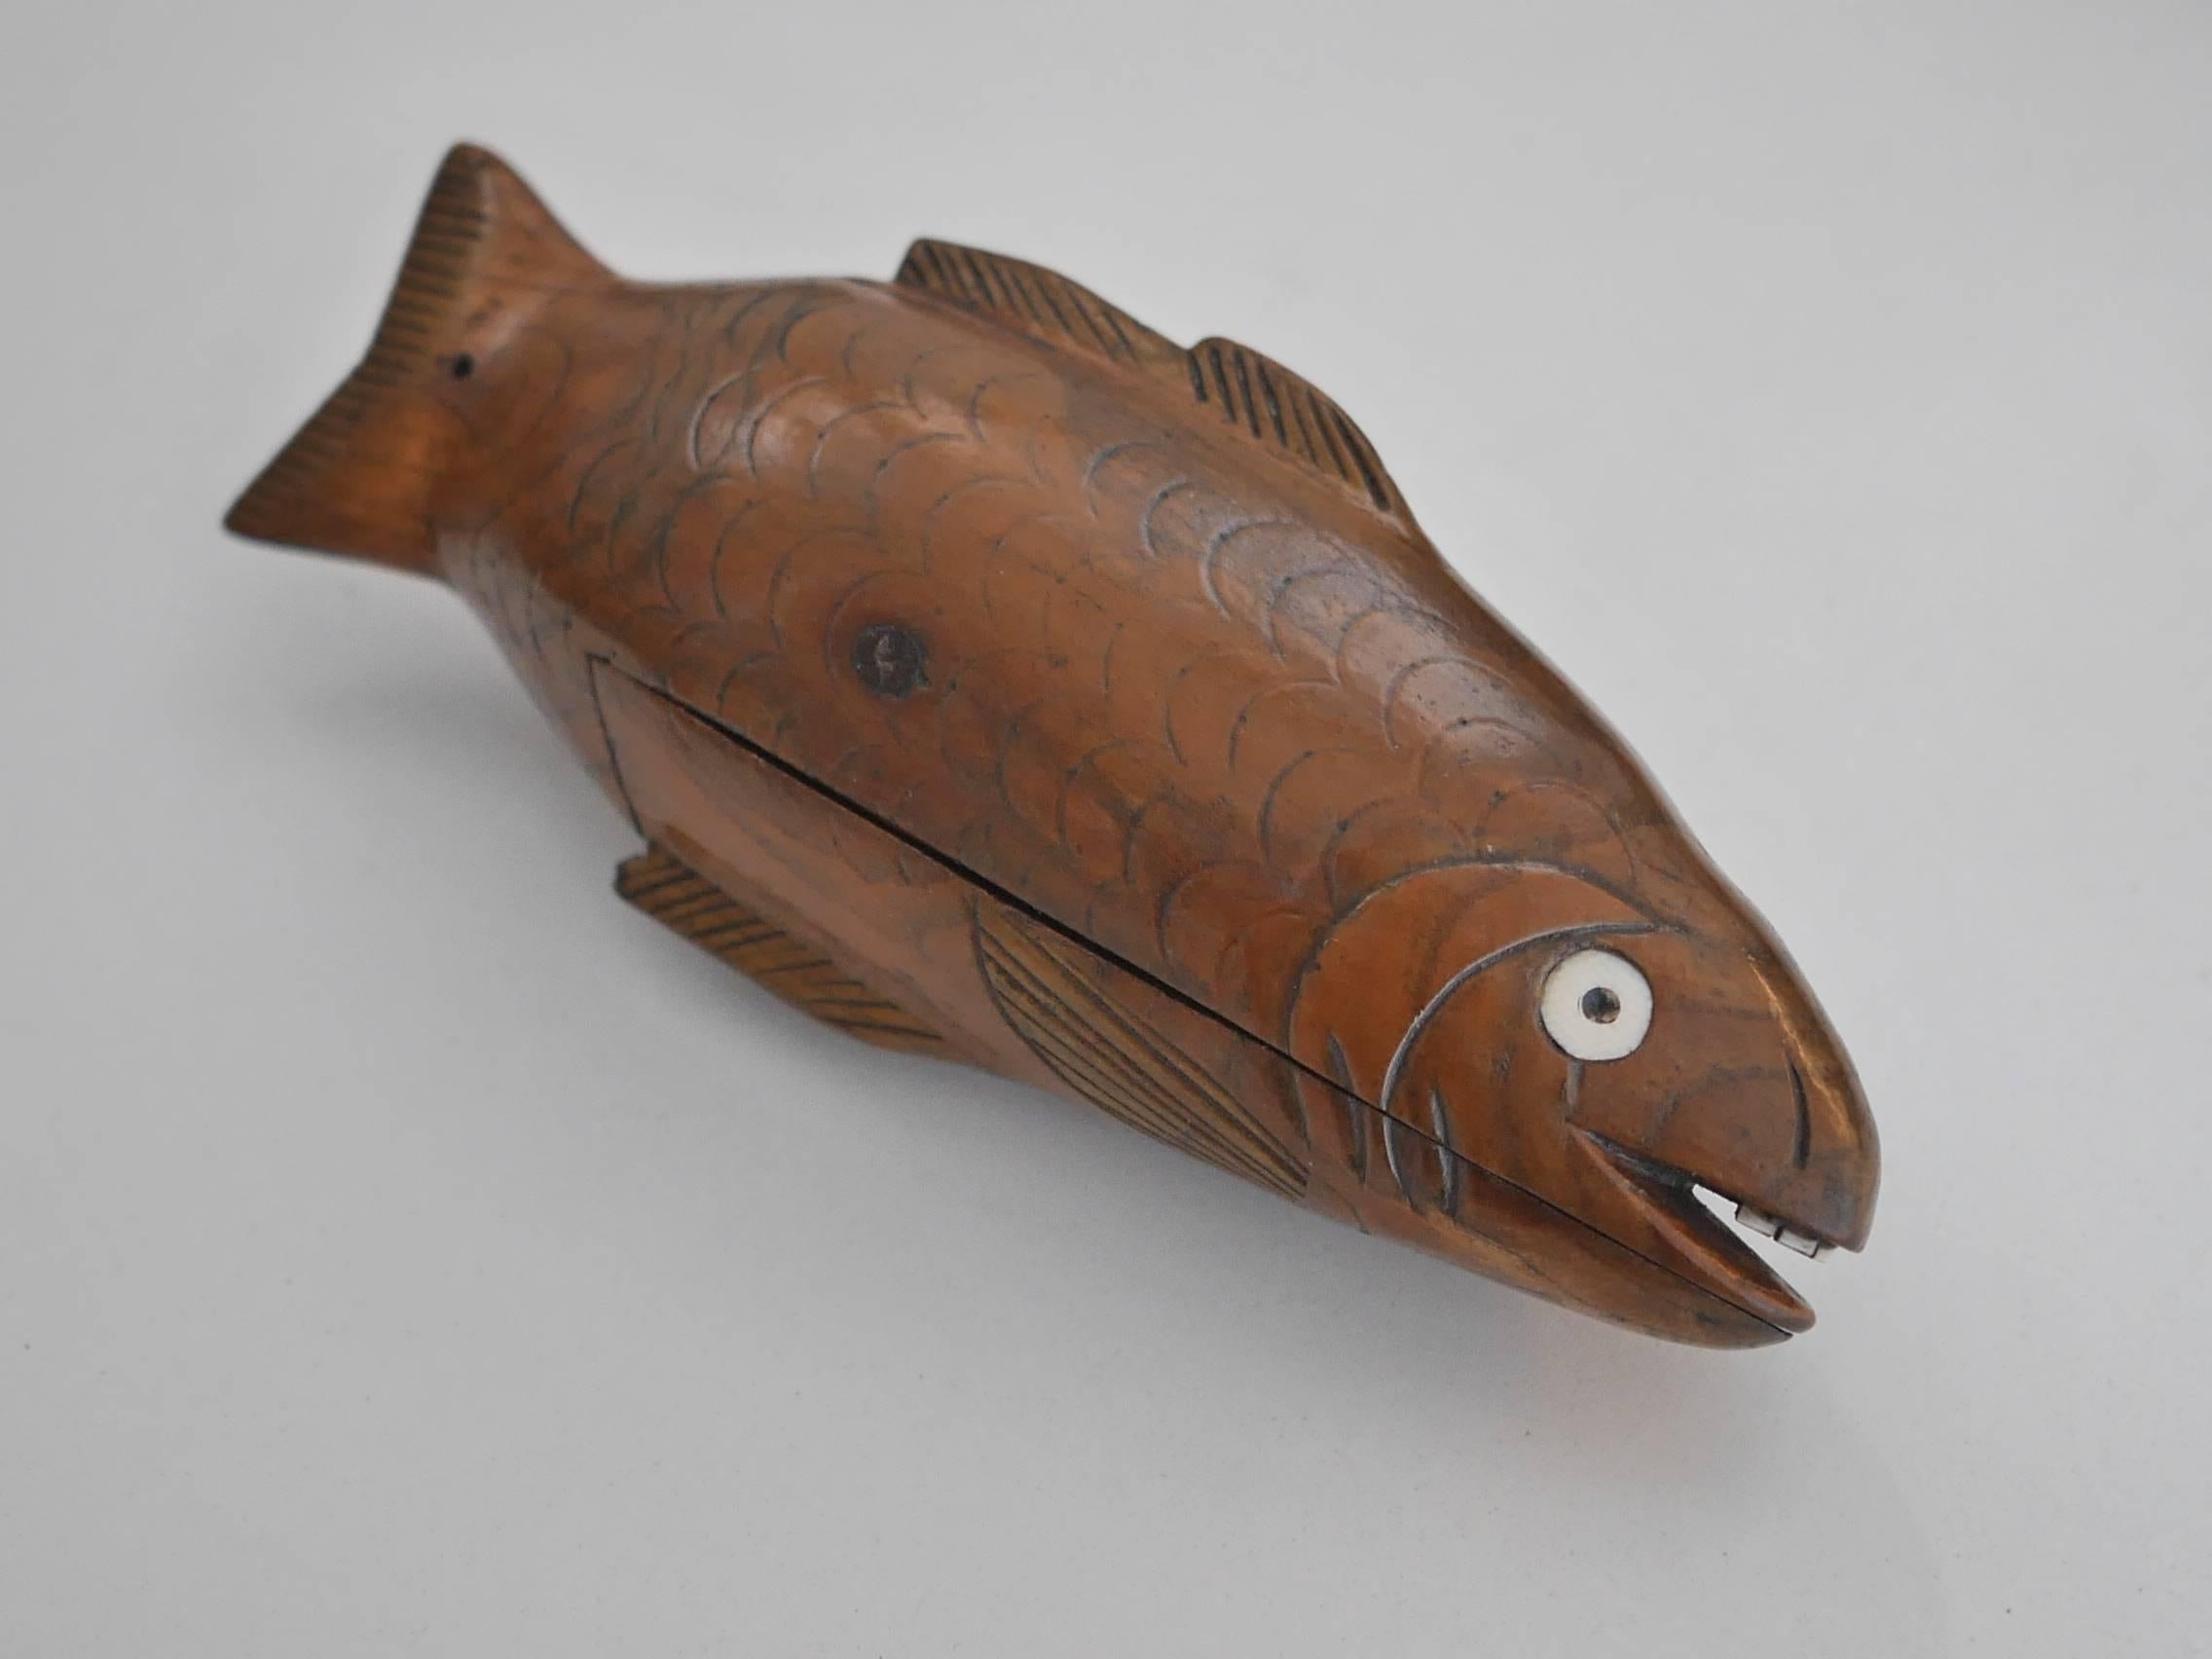 Wooden snuffbox shaped as a fish with eyes and tooth sculpted in bone. It must have belonged to a sailor.
This is a typical Folk Art piece of work. Inhaling snuff, or snuffing, as it is also called, was first witnessed by a European missionary in